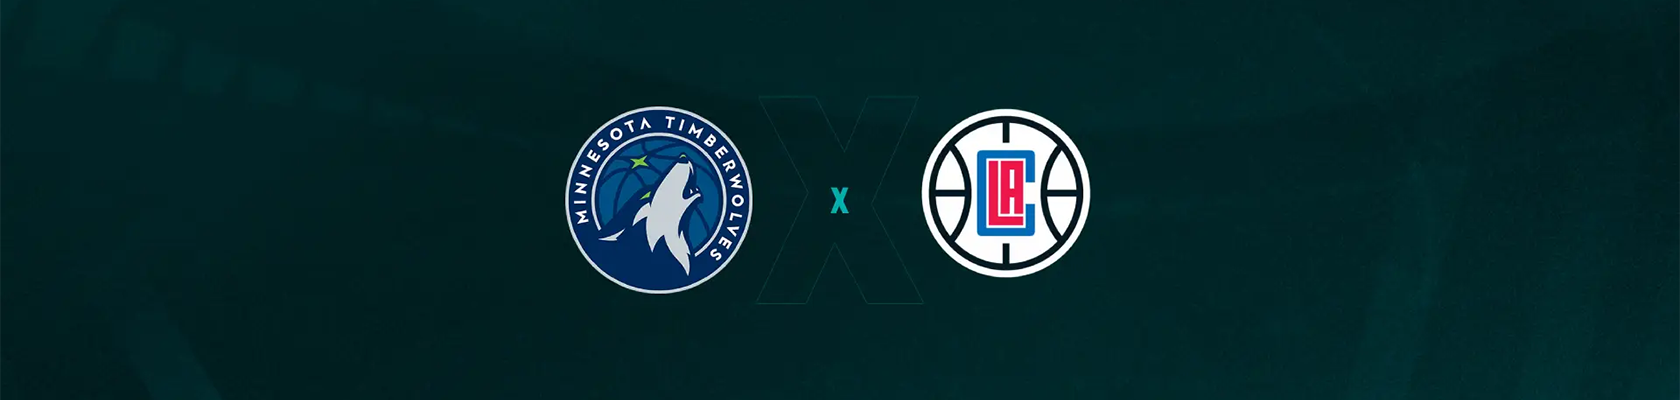 Minnesota-Timberwolves-x-Los-Angeles-Clippers